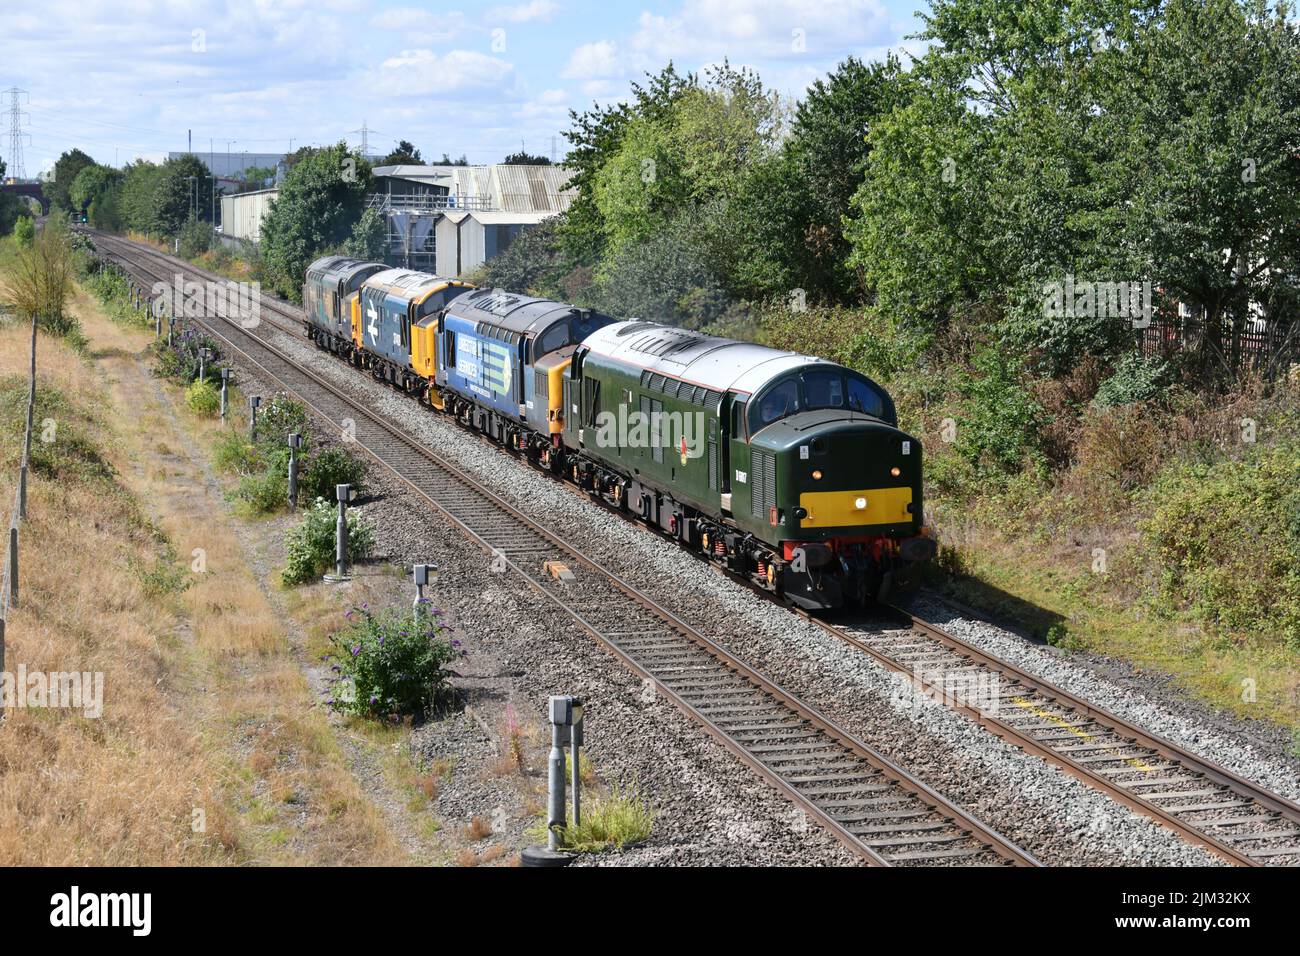 BR Green liveried English Electric Class 37 diesel locomotive number D6817 (37521) hauling sister locos 37259, 37409 and 37038 from Crewe to Worksop Stock Photo